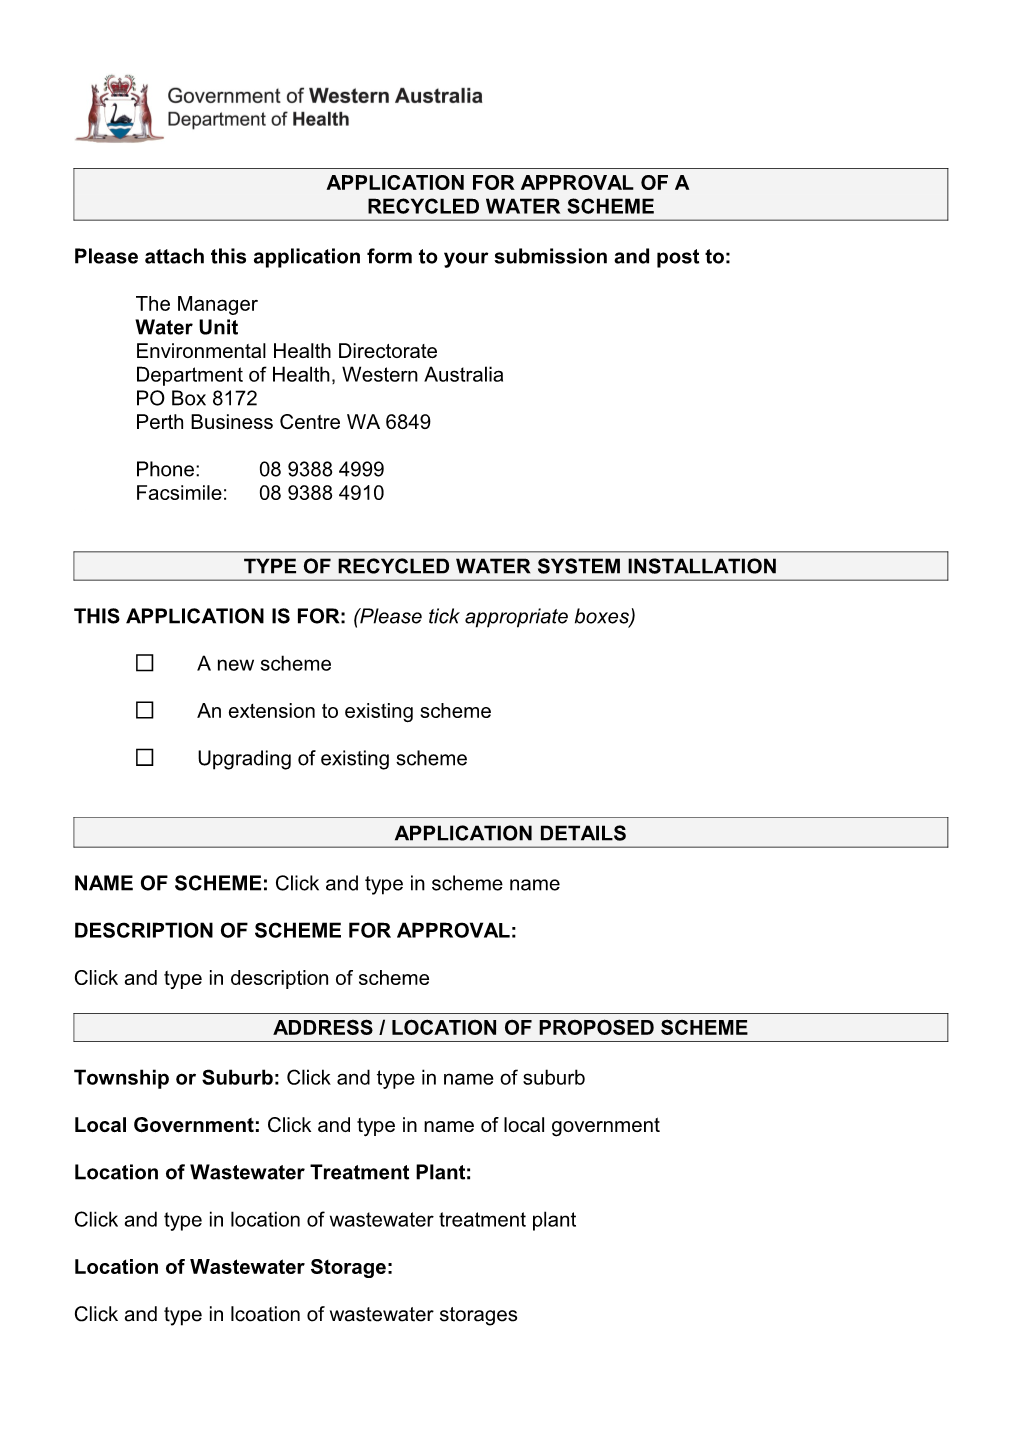 Please Attach This Application Form to Your Submission and Post To